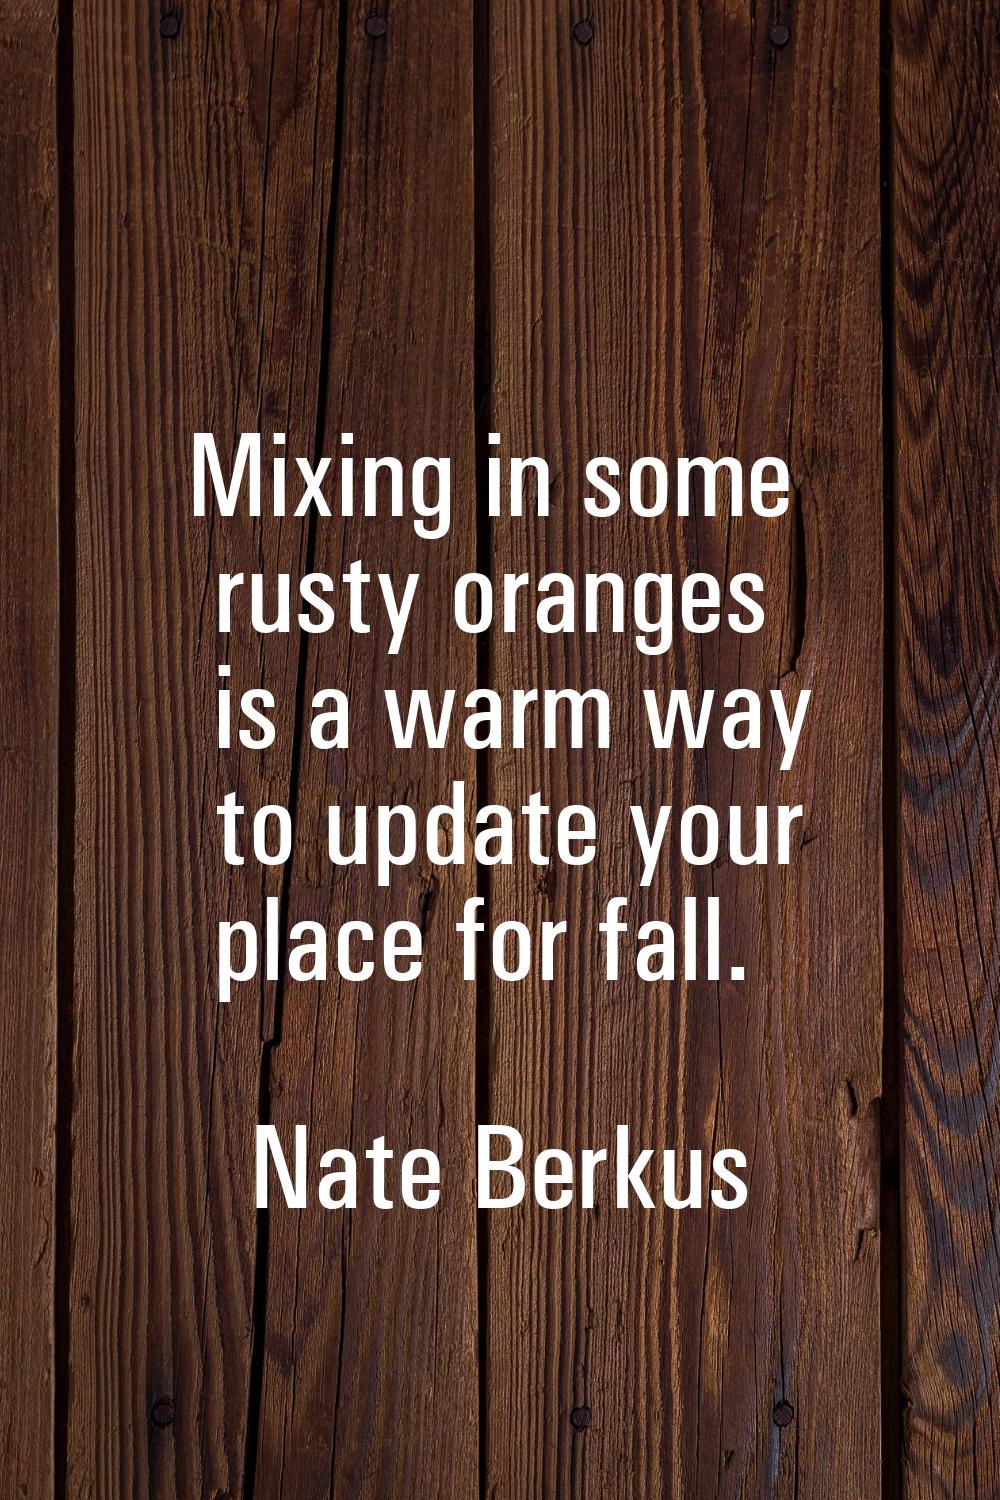 Mixing in some rusty oranges is a warm way to update your place for fall.